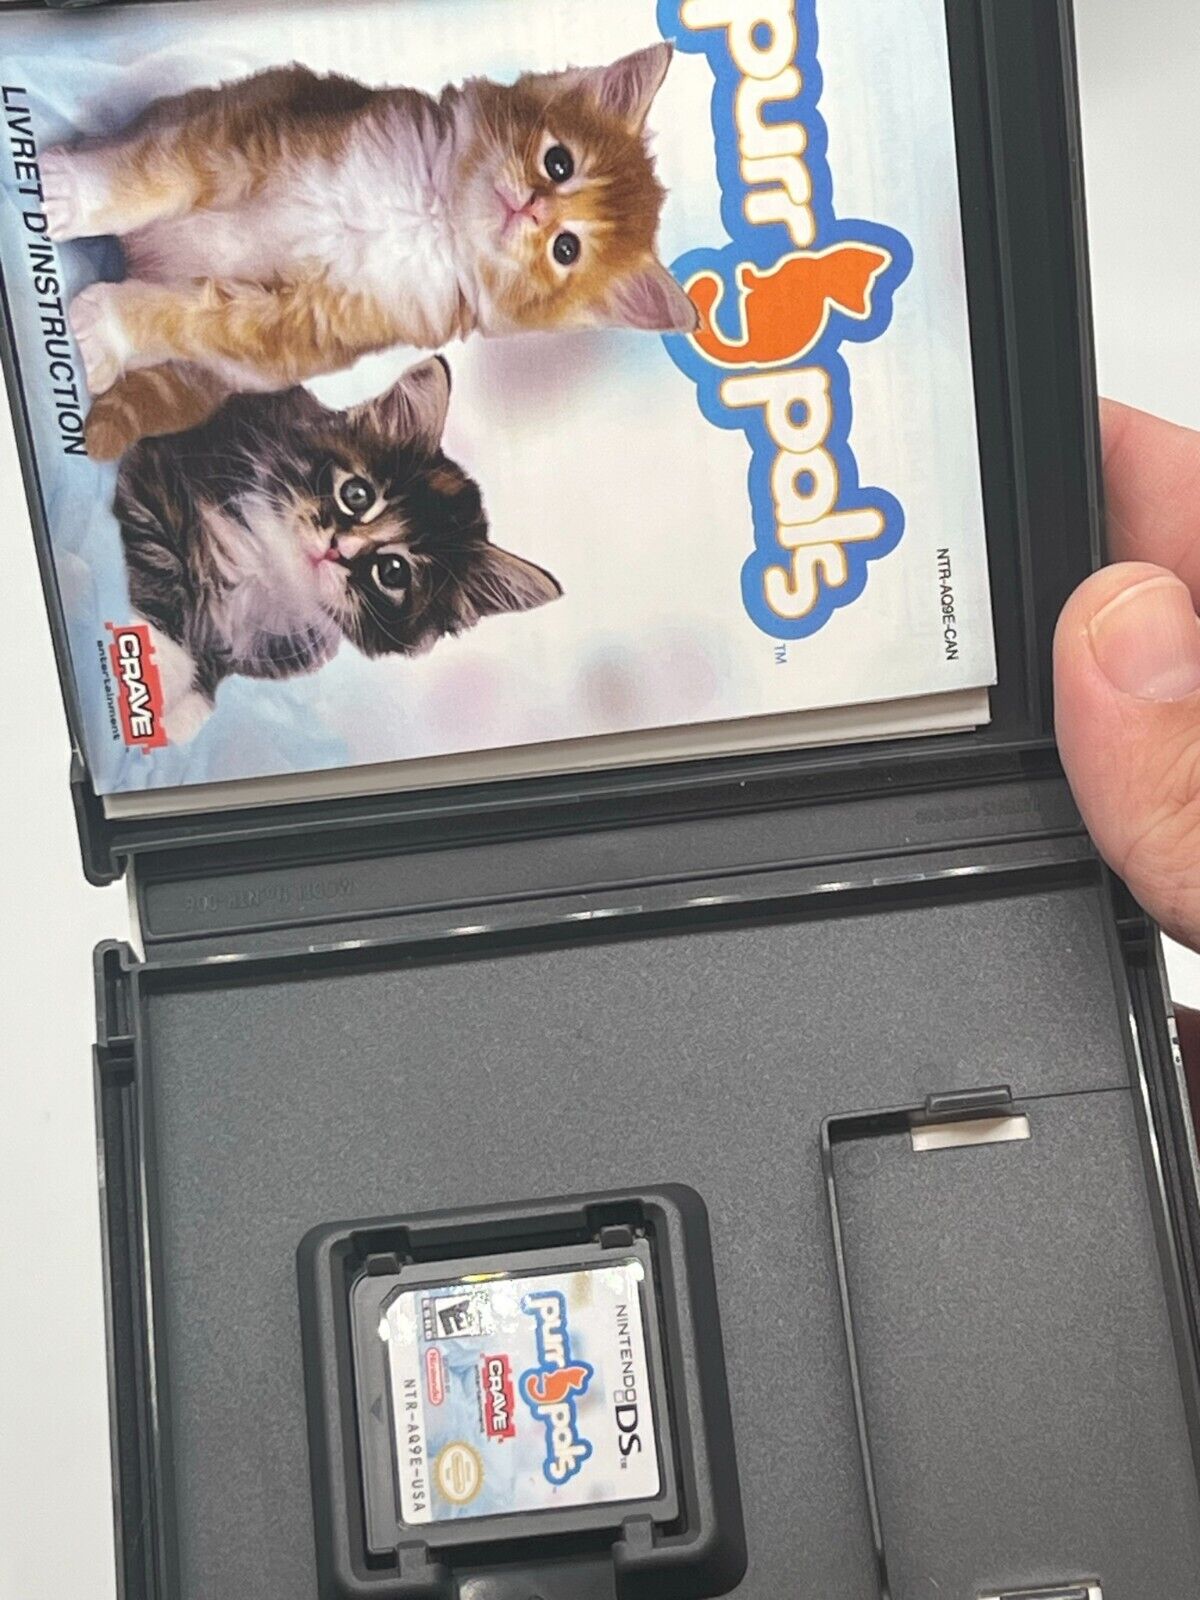 Purr Pals (Nintendo DS, 2007) - Tested